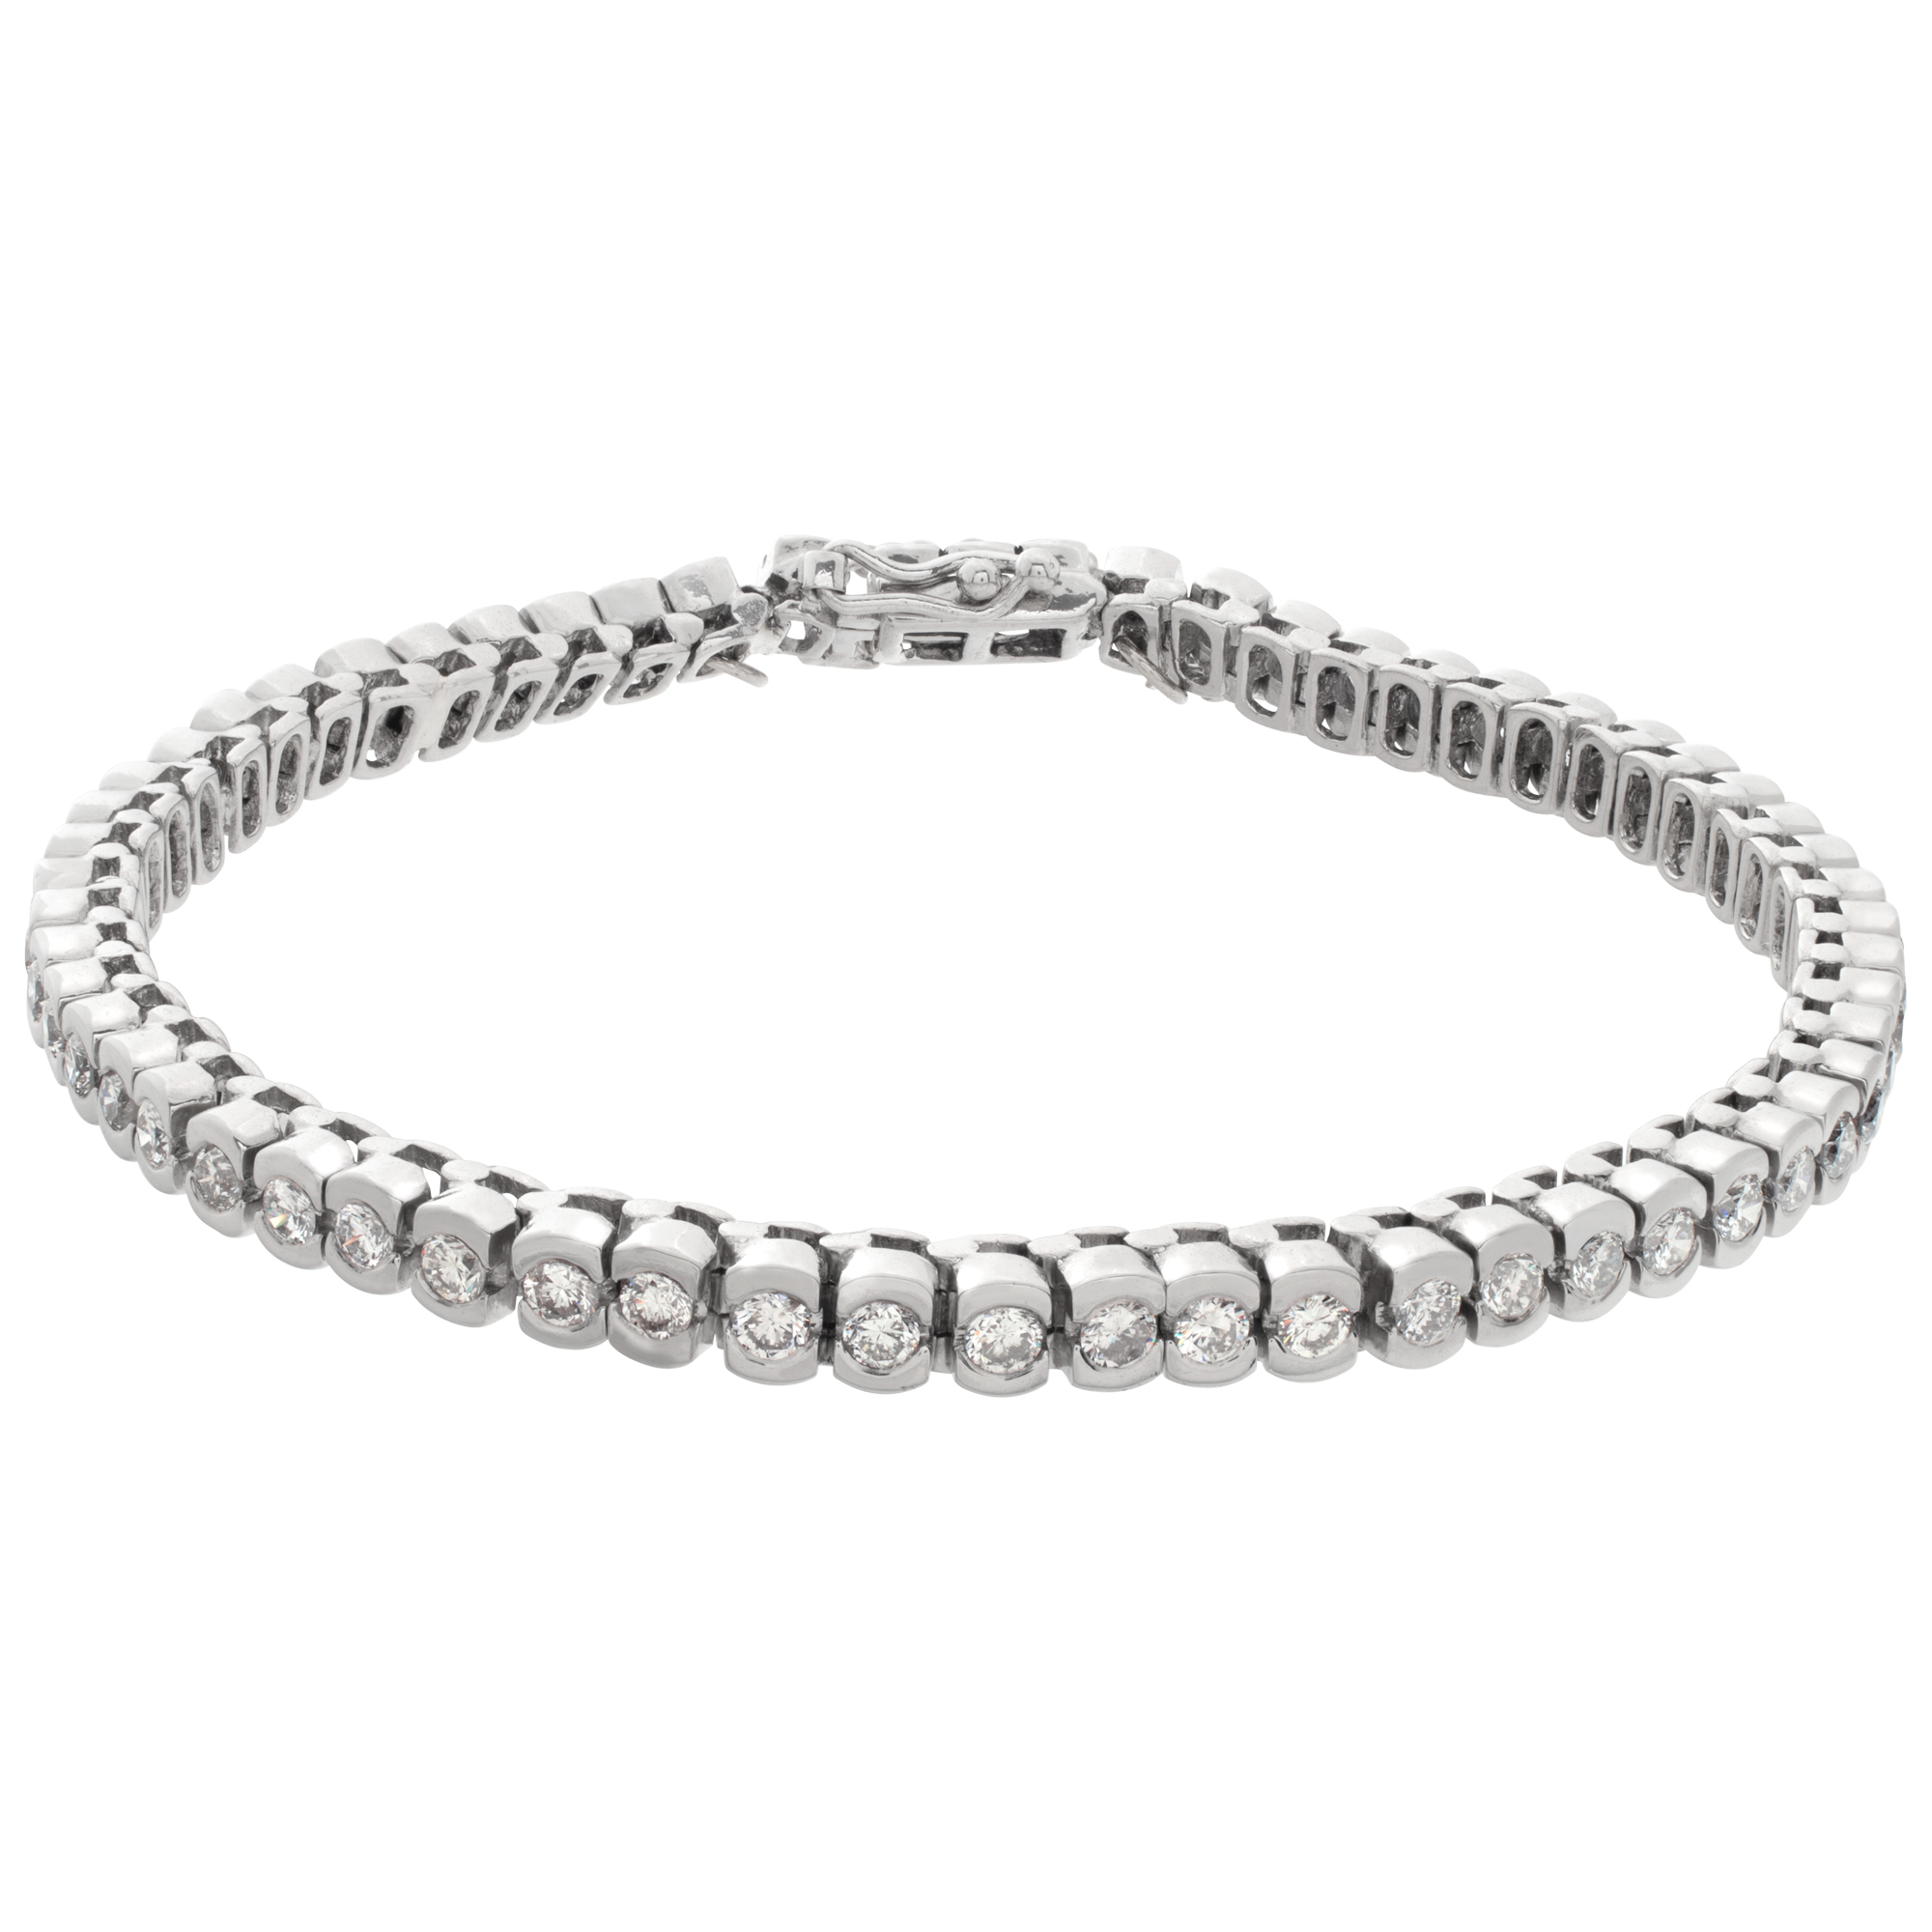 Diamond tennis bracelet in platinum with approximately 6 carats in round diamonds